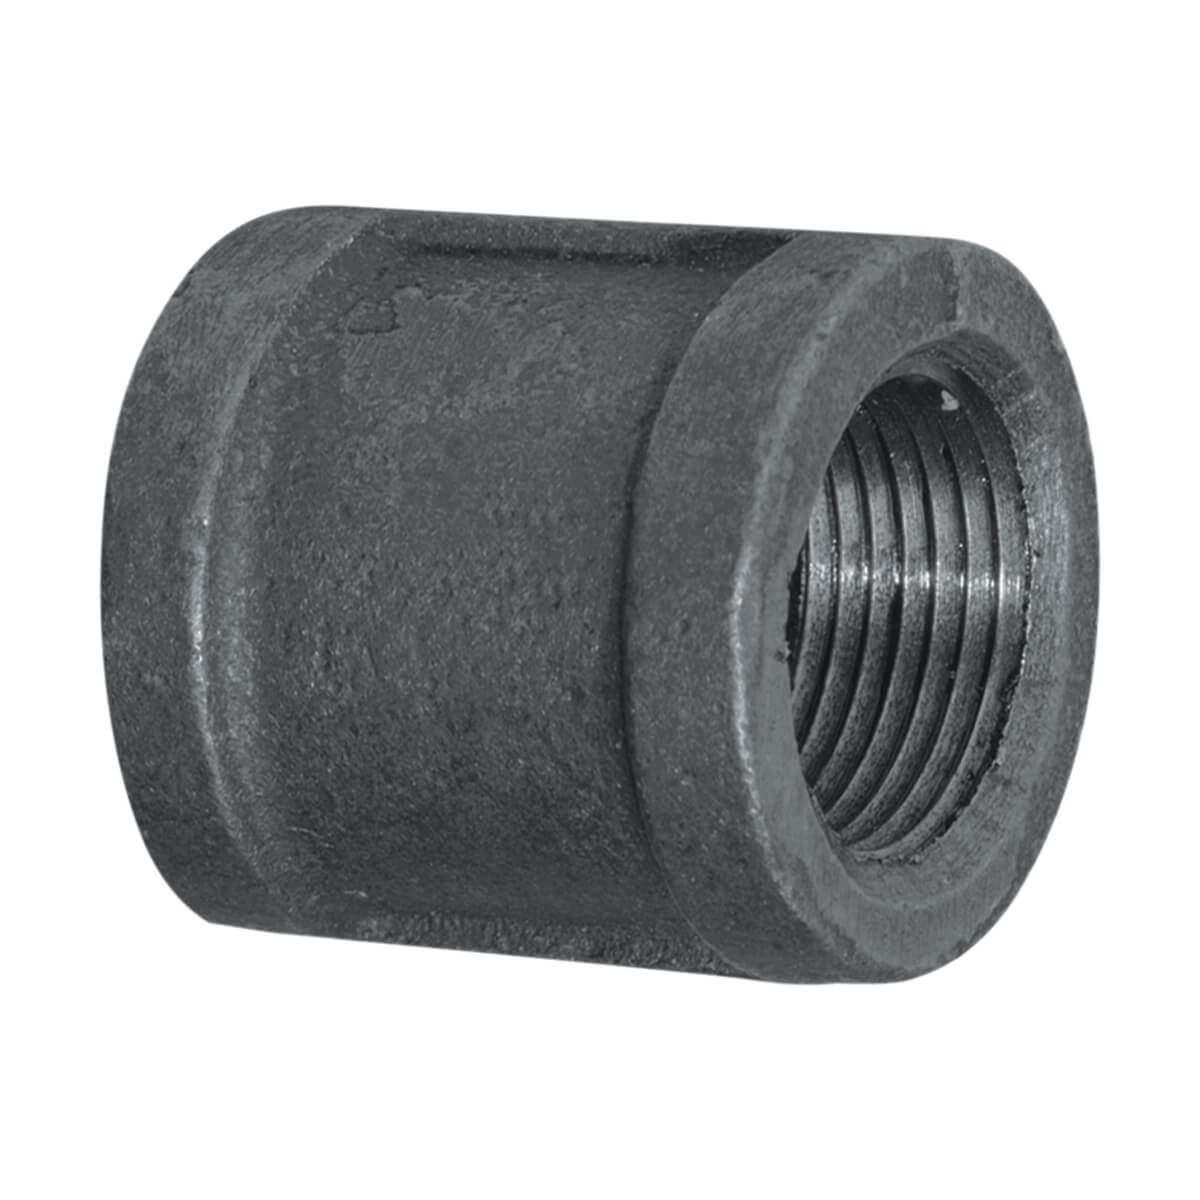 Fitting Black Iron Coupling - 3/8-in